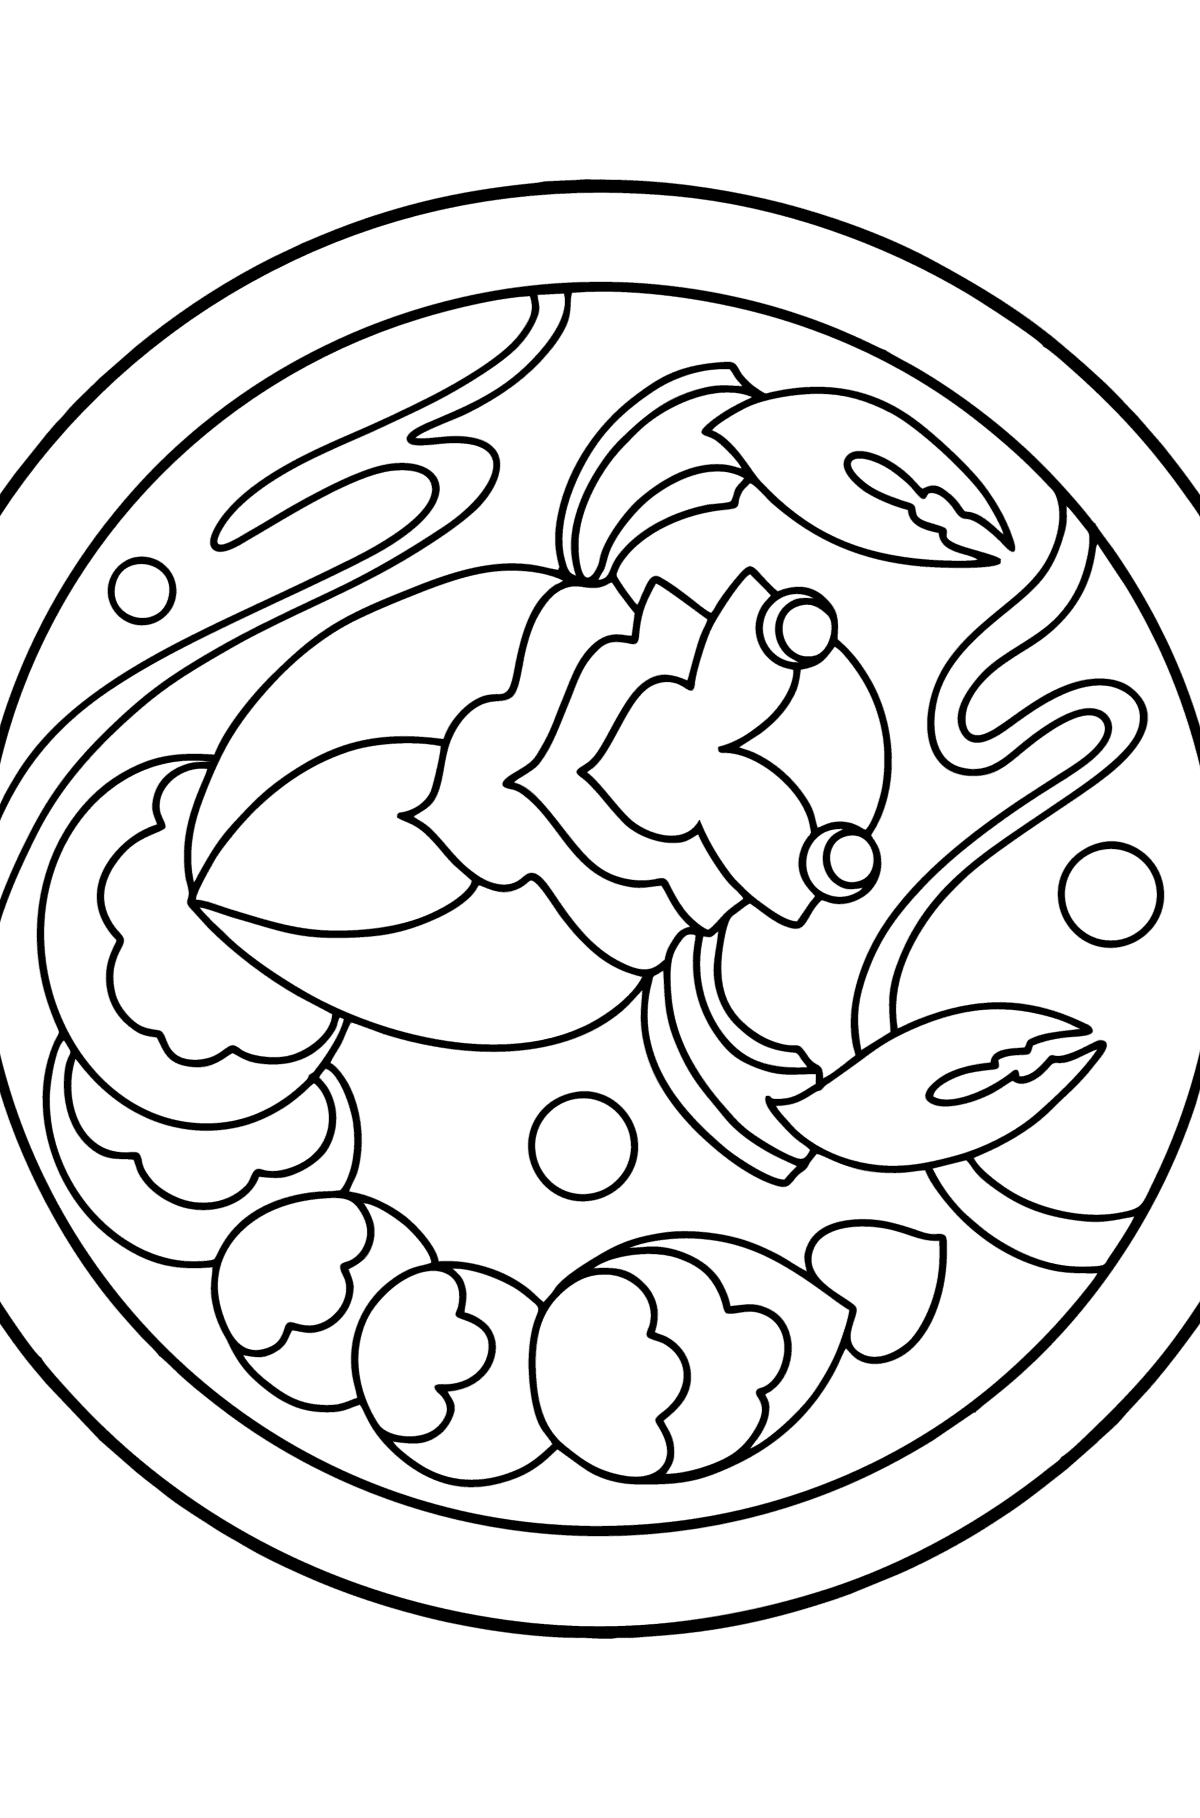 Coloring page for kids - zodiac sign Scorpio - Coloring Pages for Kids